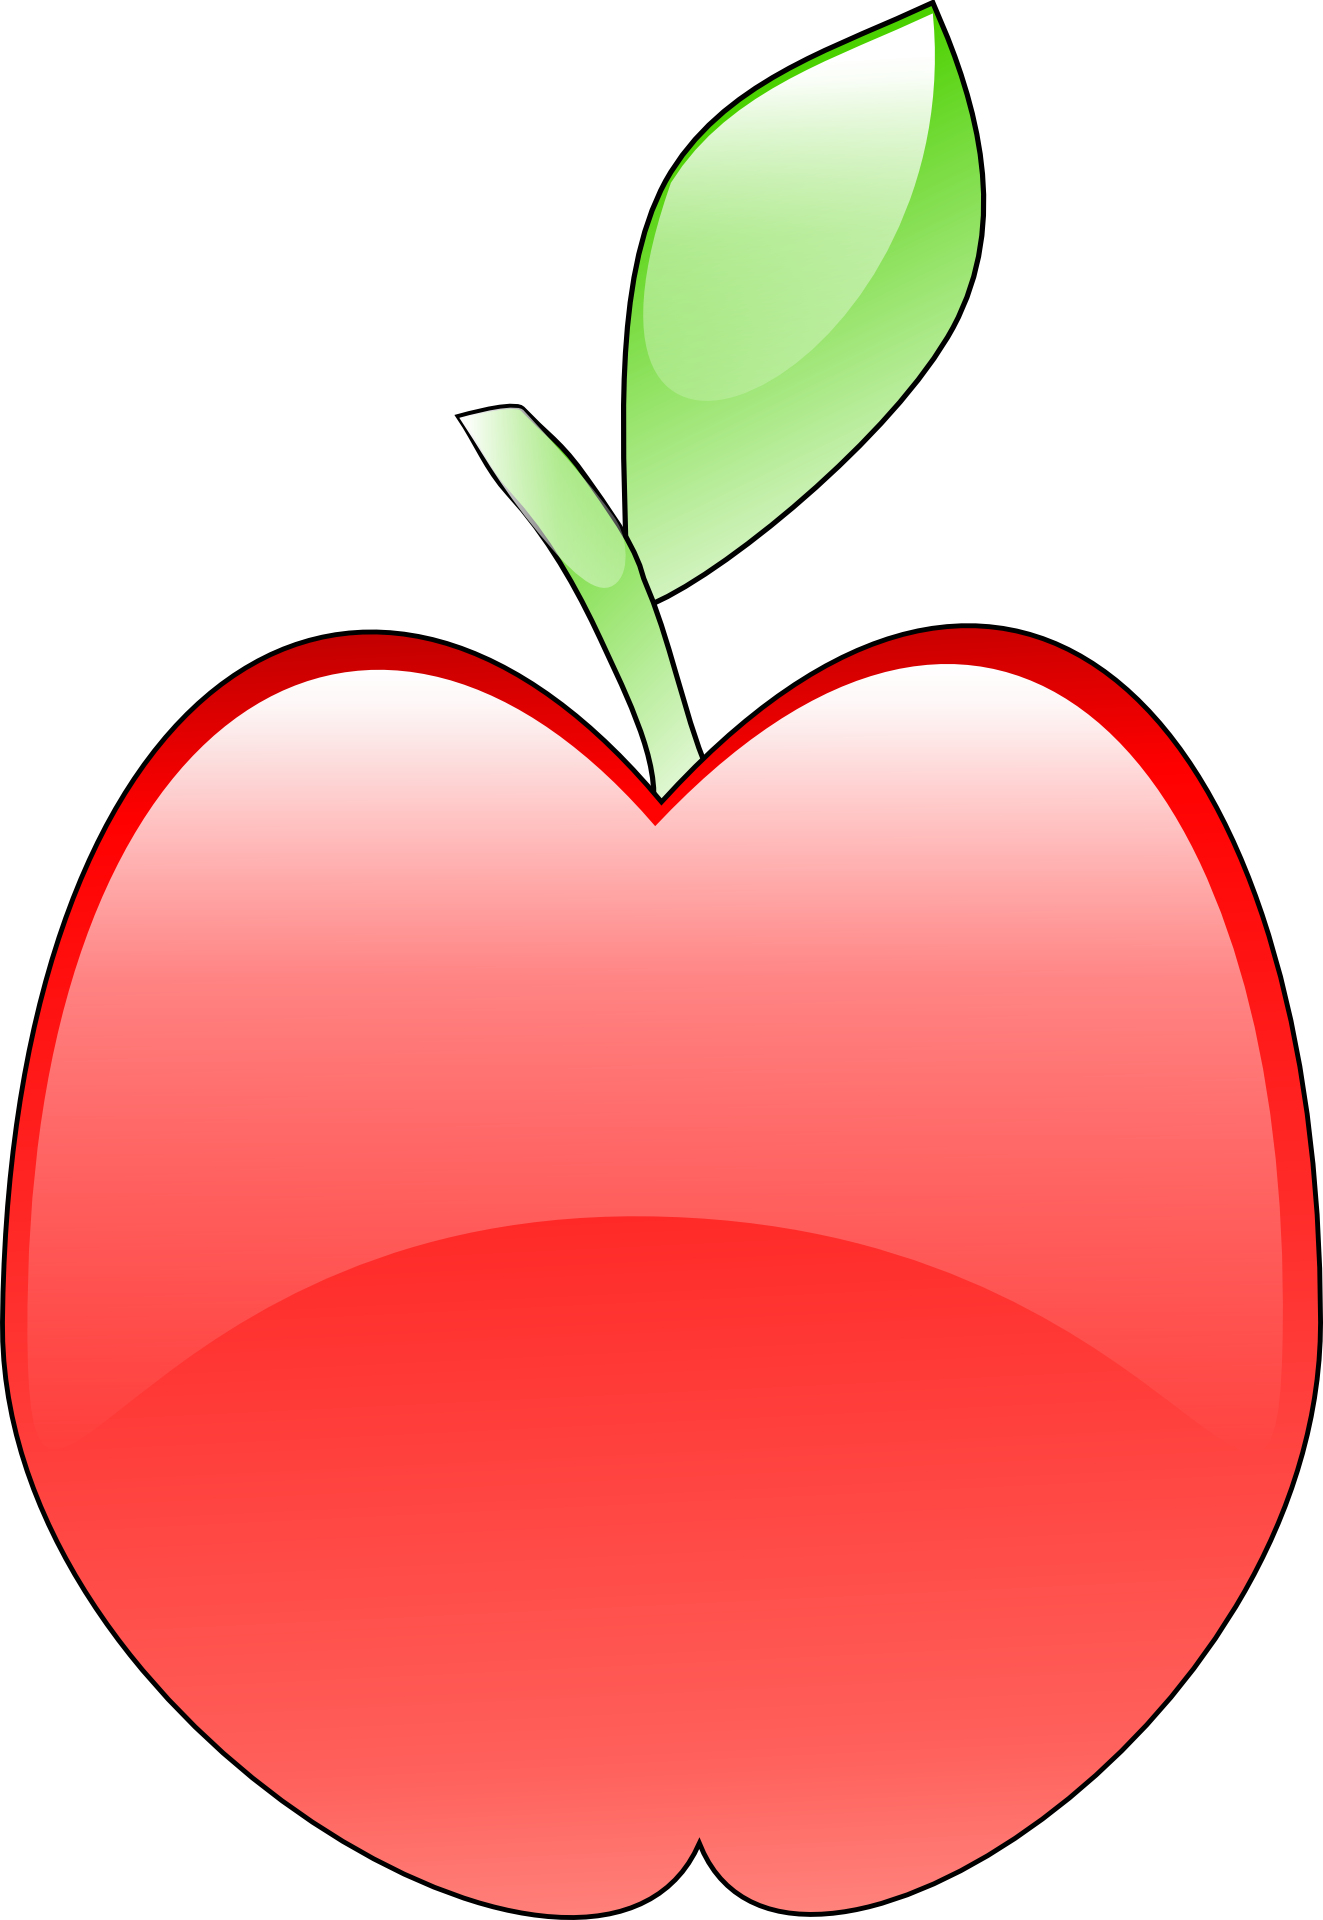 Dainty red apple drawing free image download